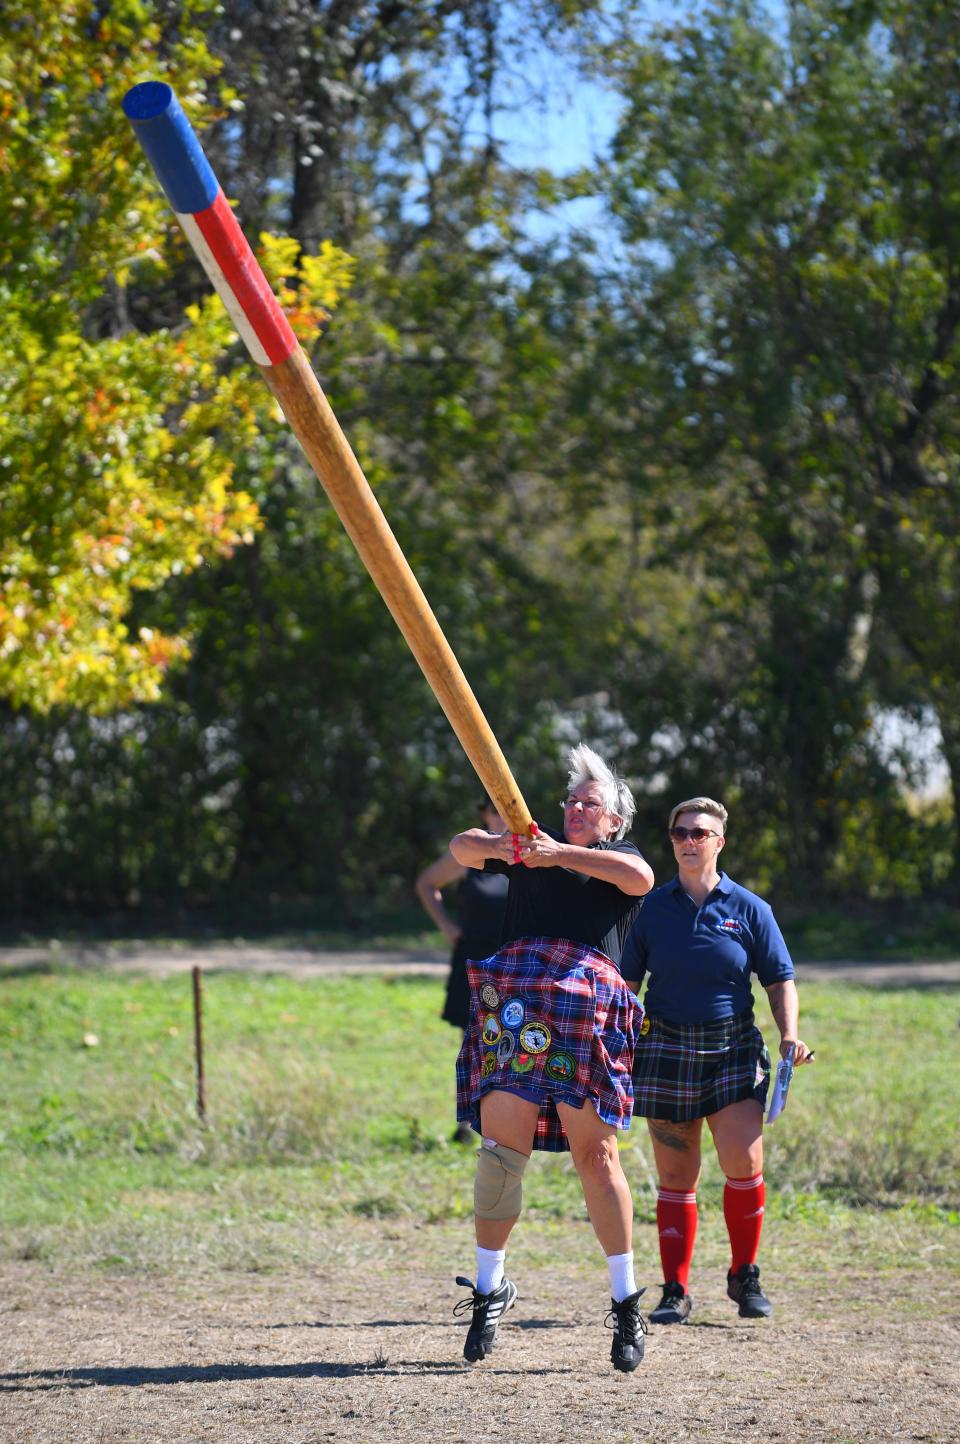 Holland's Kate Boeve tossing a Caber at the recent Masters World Championships